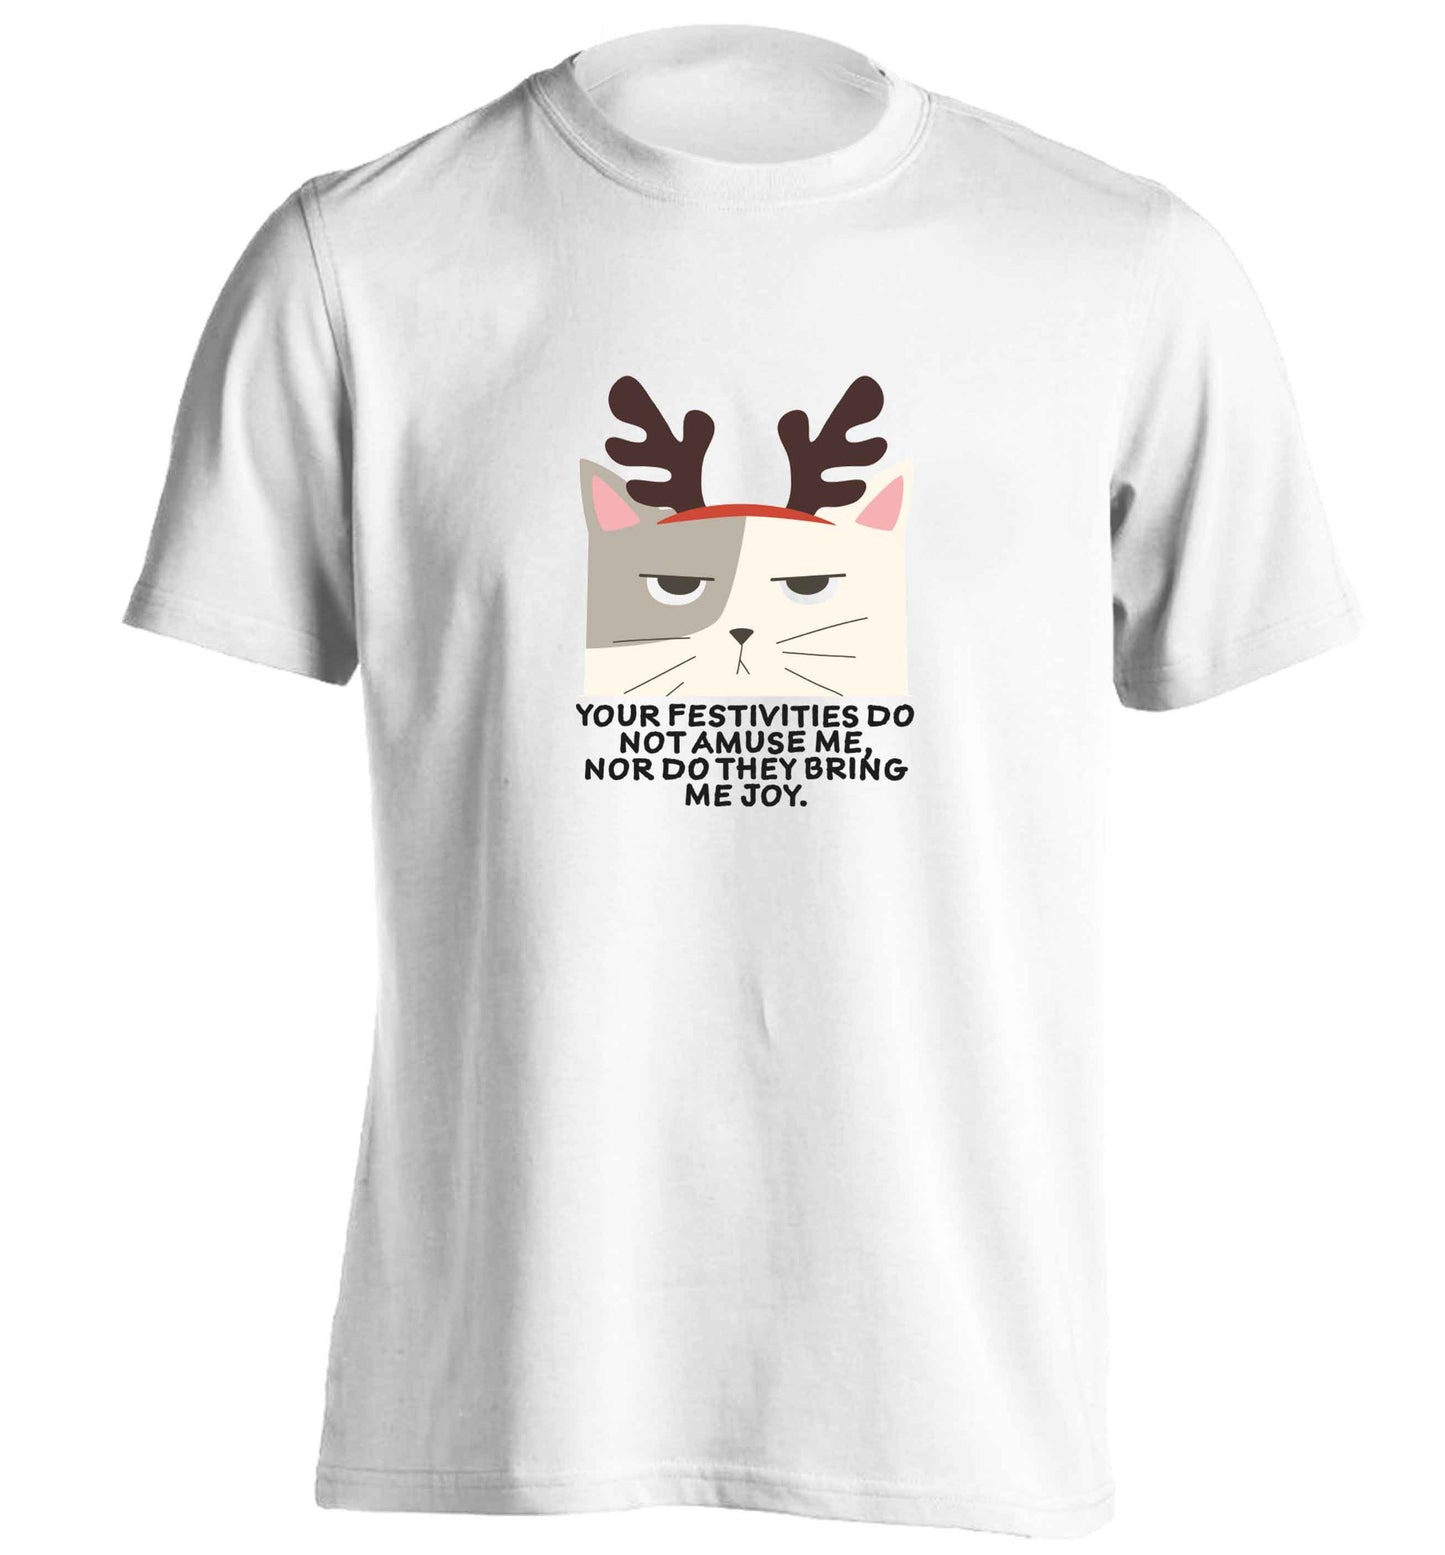 Your festivities do not amuse me nor do they bring me joy adults unisex white Tshirt 2XL